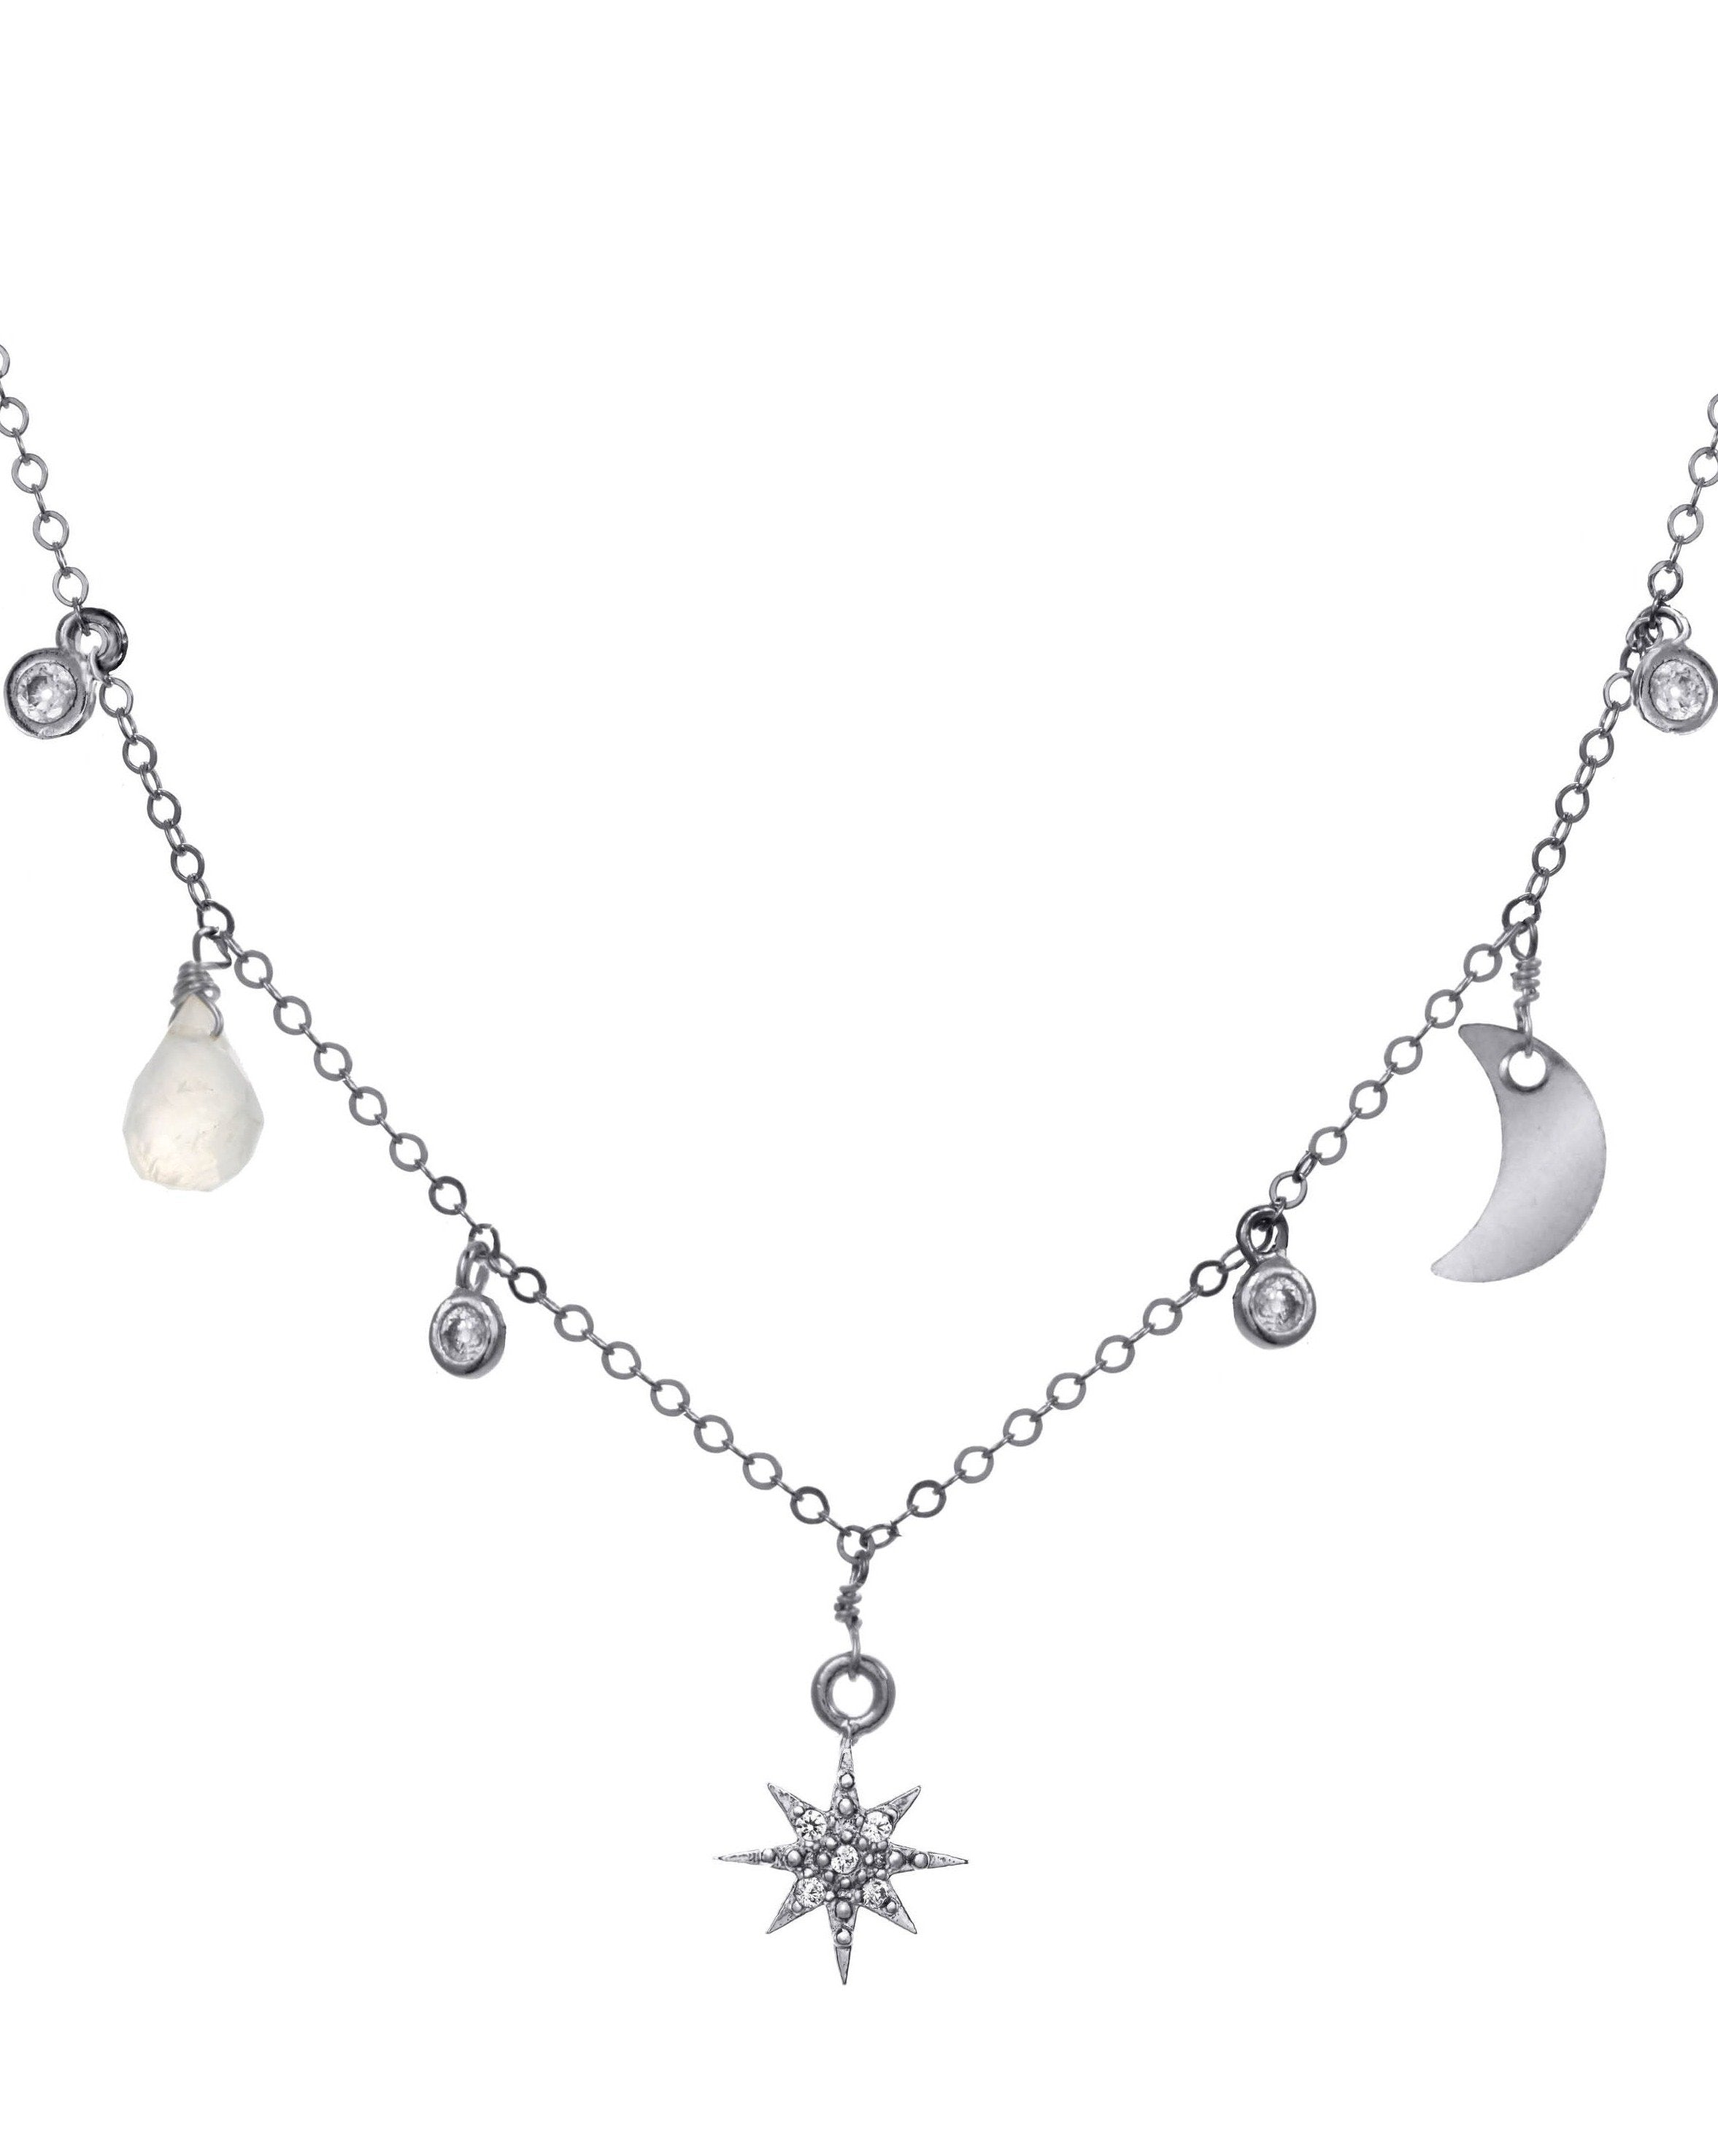 Priya Necklace by KOZAKH. A 16 to 18 inch adjustable length necklace, crafted in Sterling Silver, featuring a faceted moonstone droplet, a moon charm, a Cubic Zirconia 8 point star charm, and 2mm CZ bezel charms.